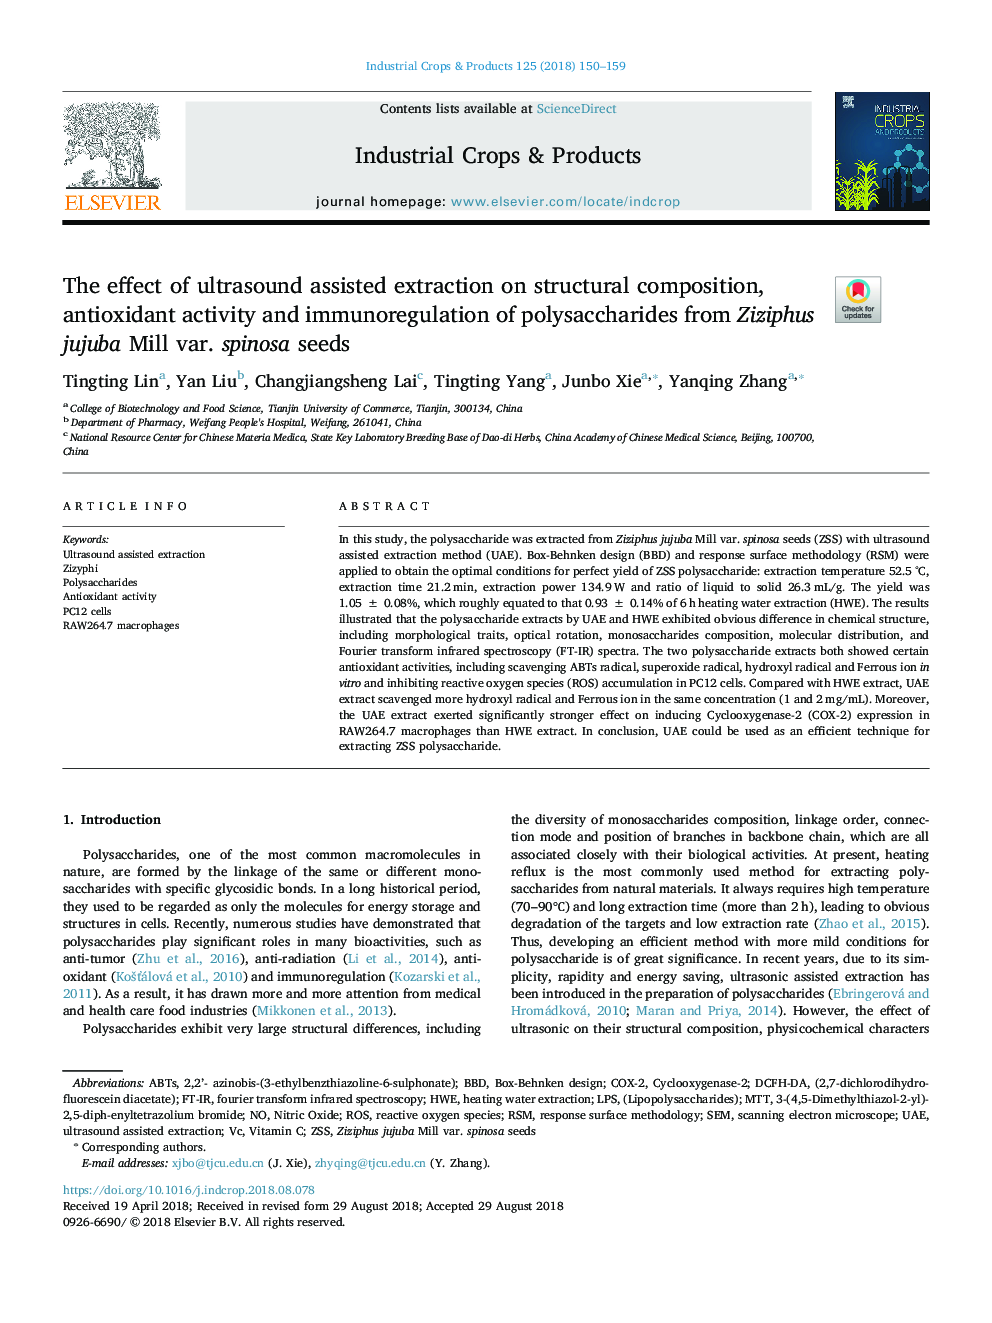 The effect of ultrasound assisted extraction on structural composition, antioxidant activity and immunoregulation of polysaccharides from Ziziphus jujuba Mill var. spinosa seeds